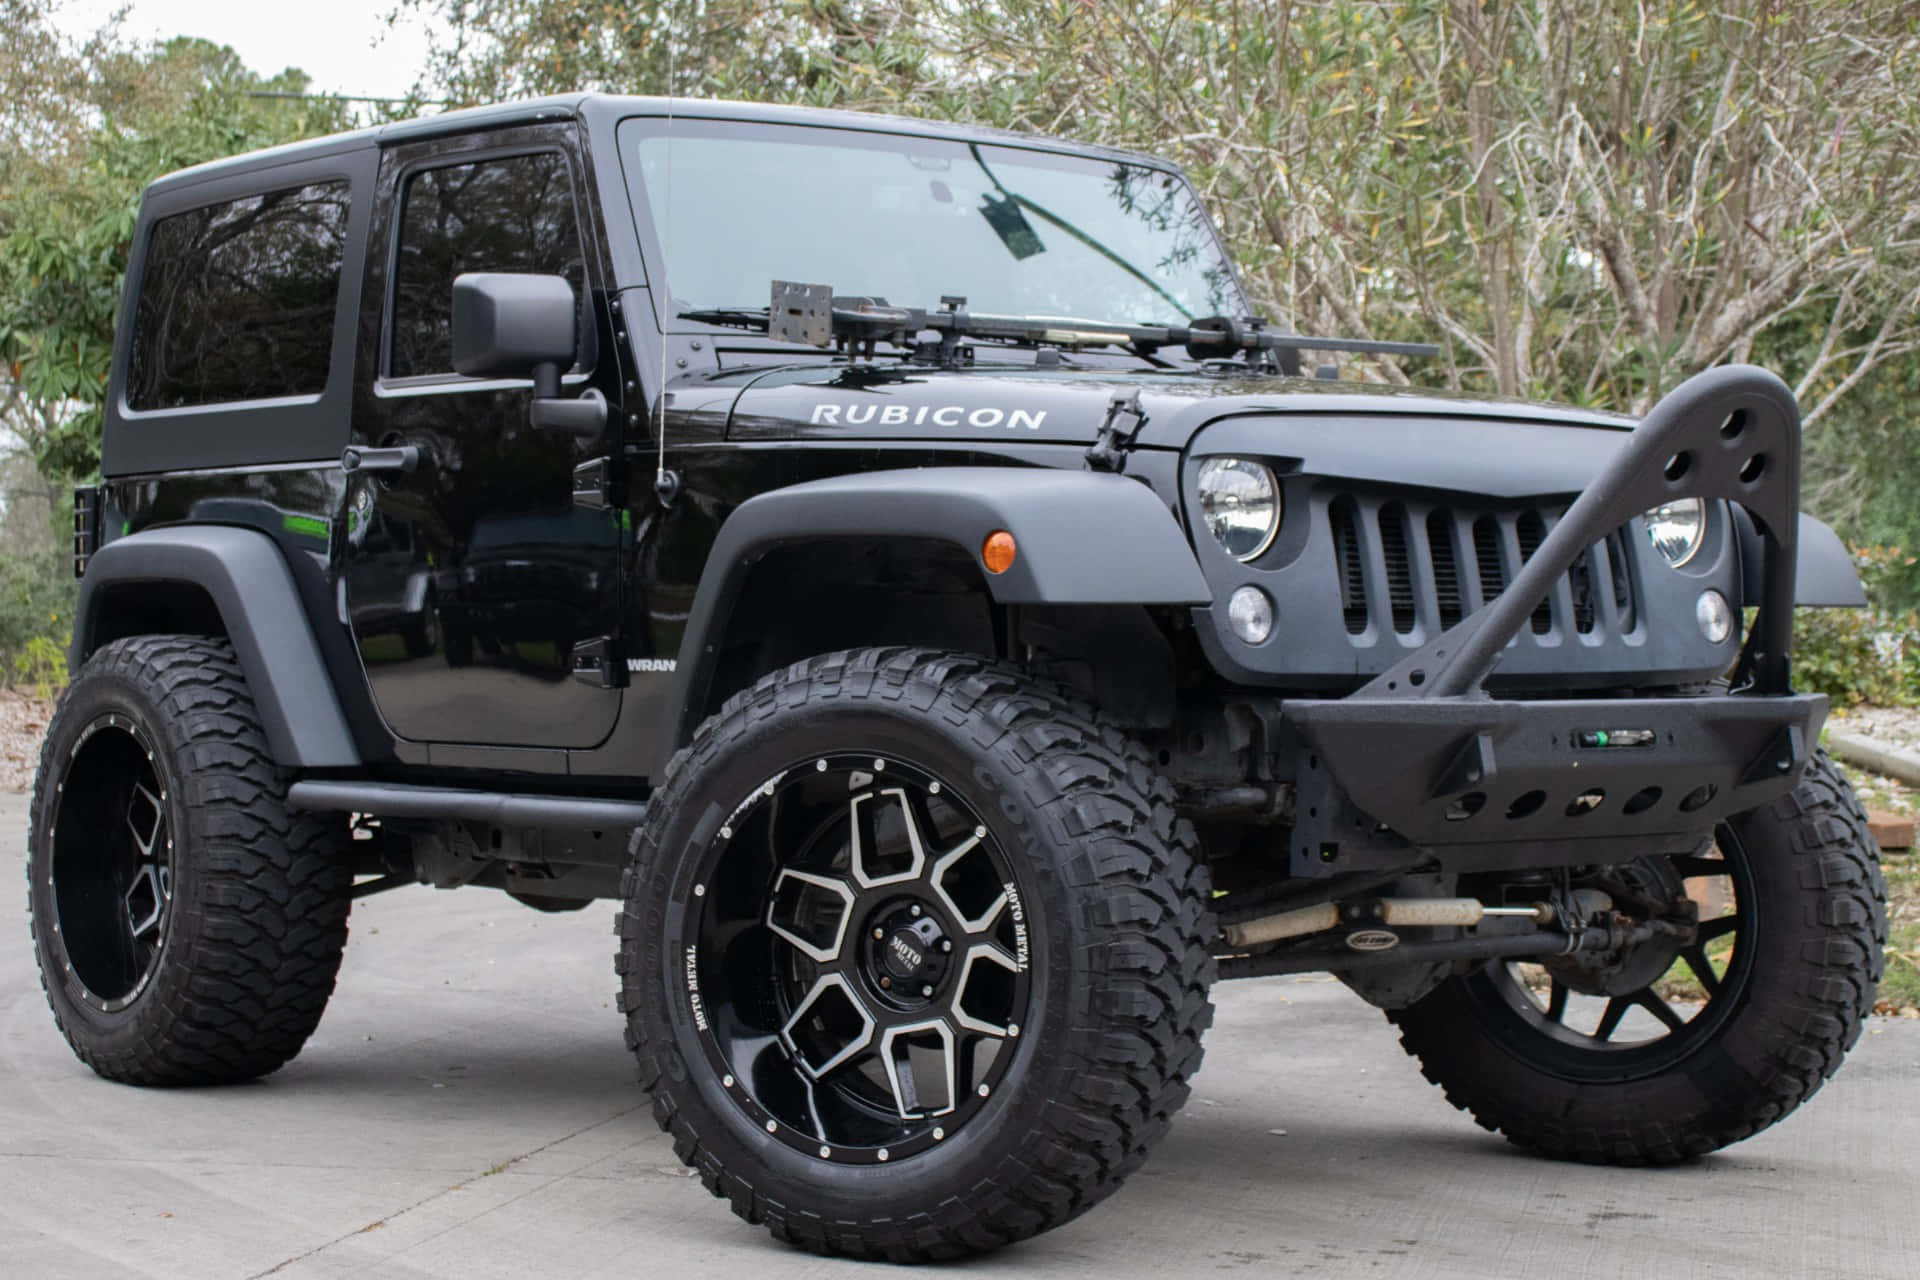 Get Ready to Take on the Day with the Iconic Jeep Wrangler